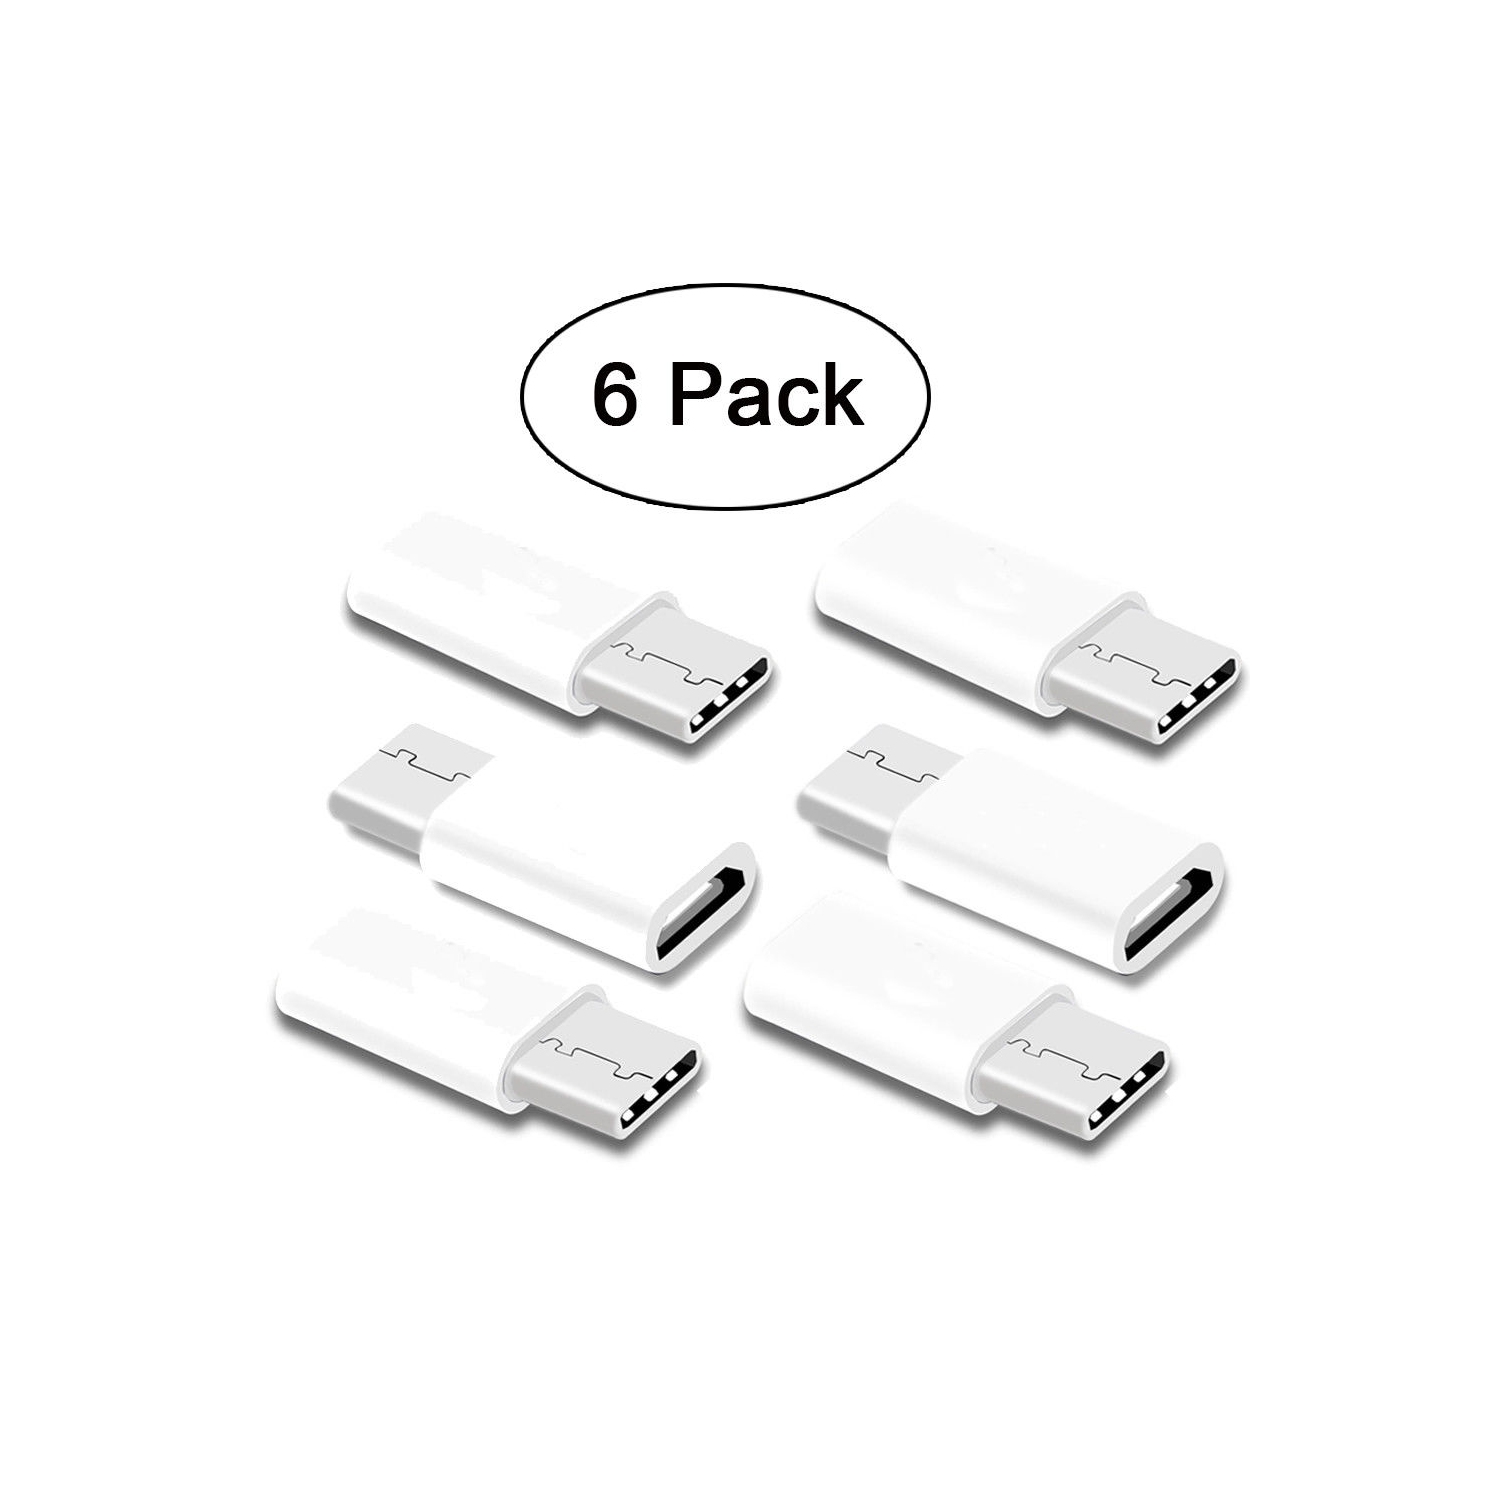 6X Micro USB to USB-C 3.1 Type C Charger Adapter for Samsung LG Huawei (White)